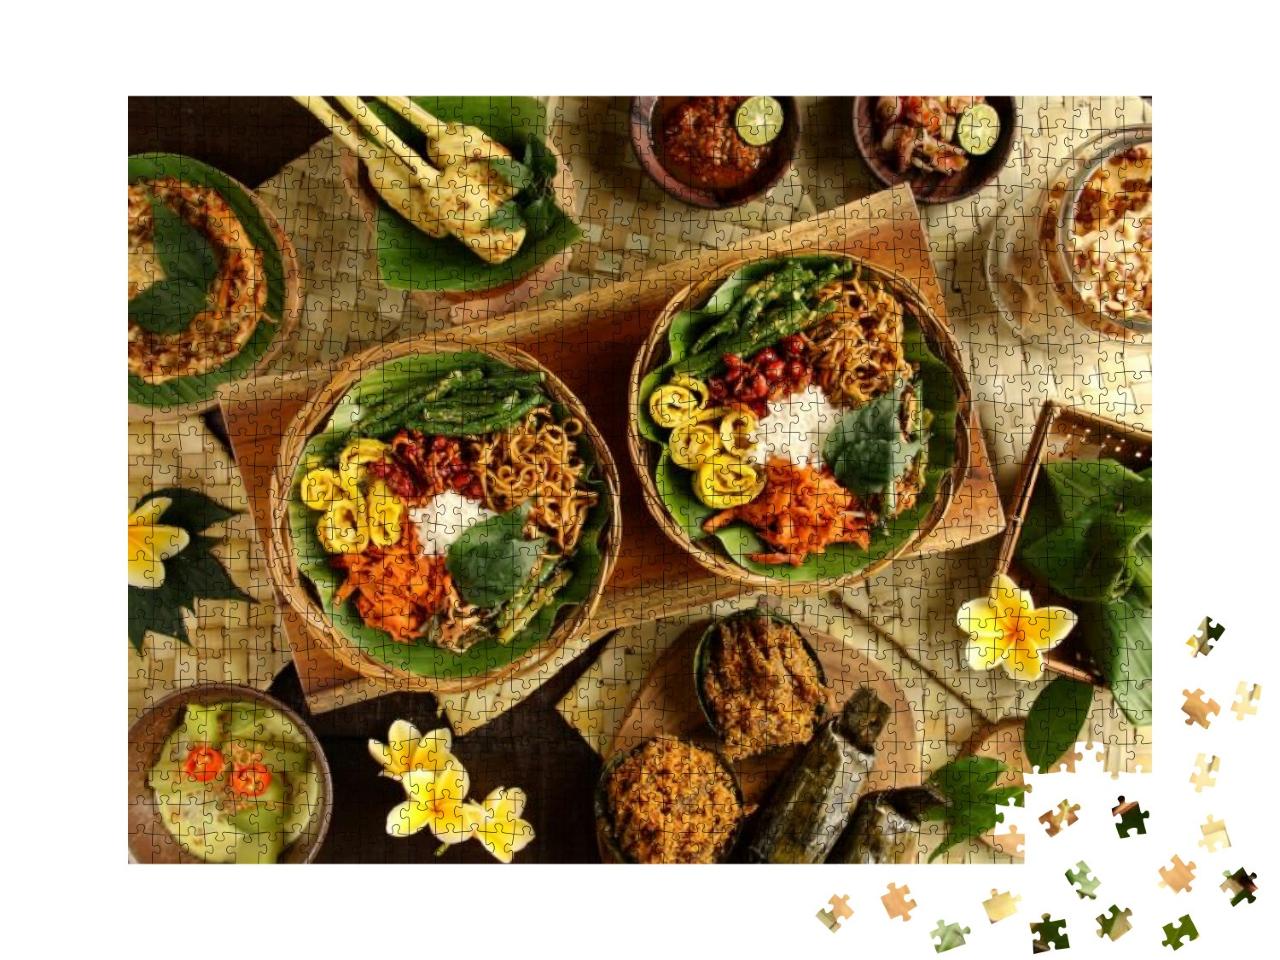 Nasi Campur Bali. Popular Balinese Meal of Rice with Vari... Jigsaw Puzzle with 1000 pieces